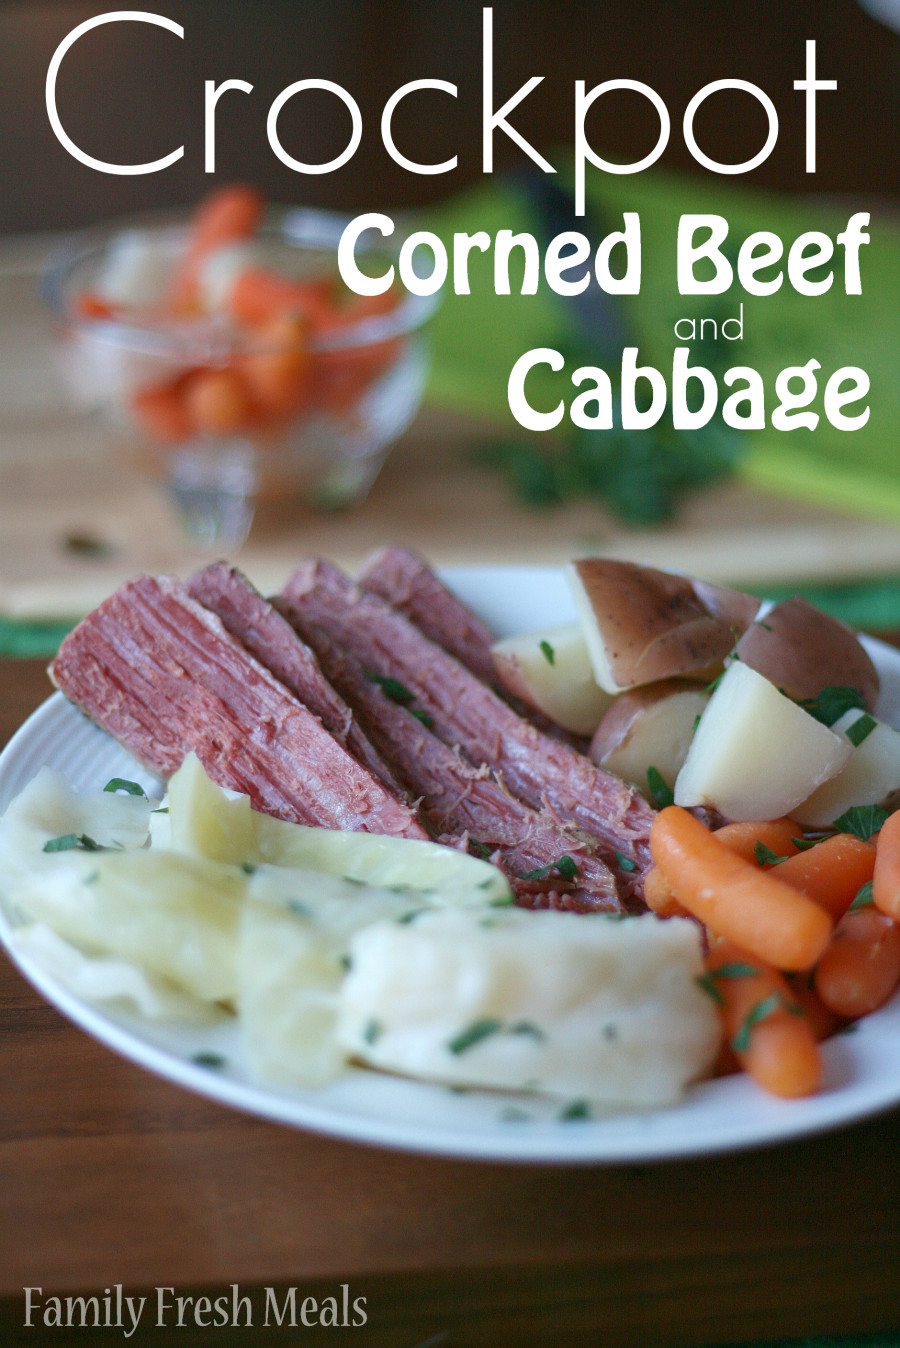 Crockpot Corned Beef And Cabbage
 Crockpot Corned Beef and Cabbage Recipe Family Fresh Meals